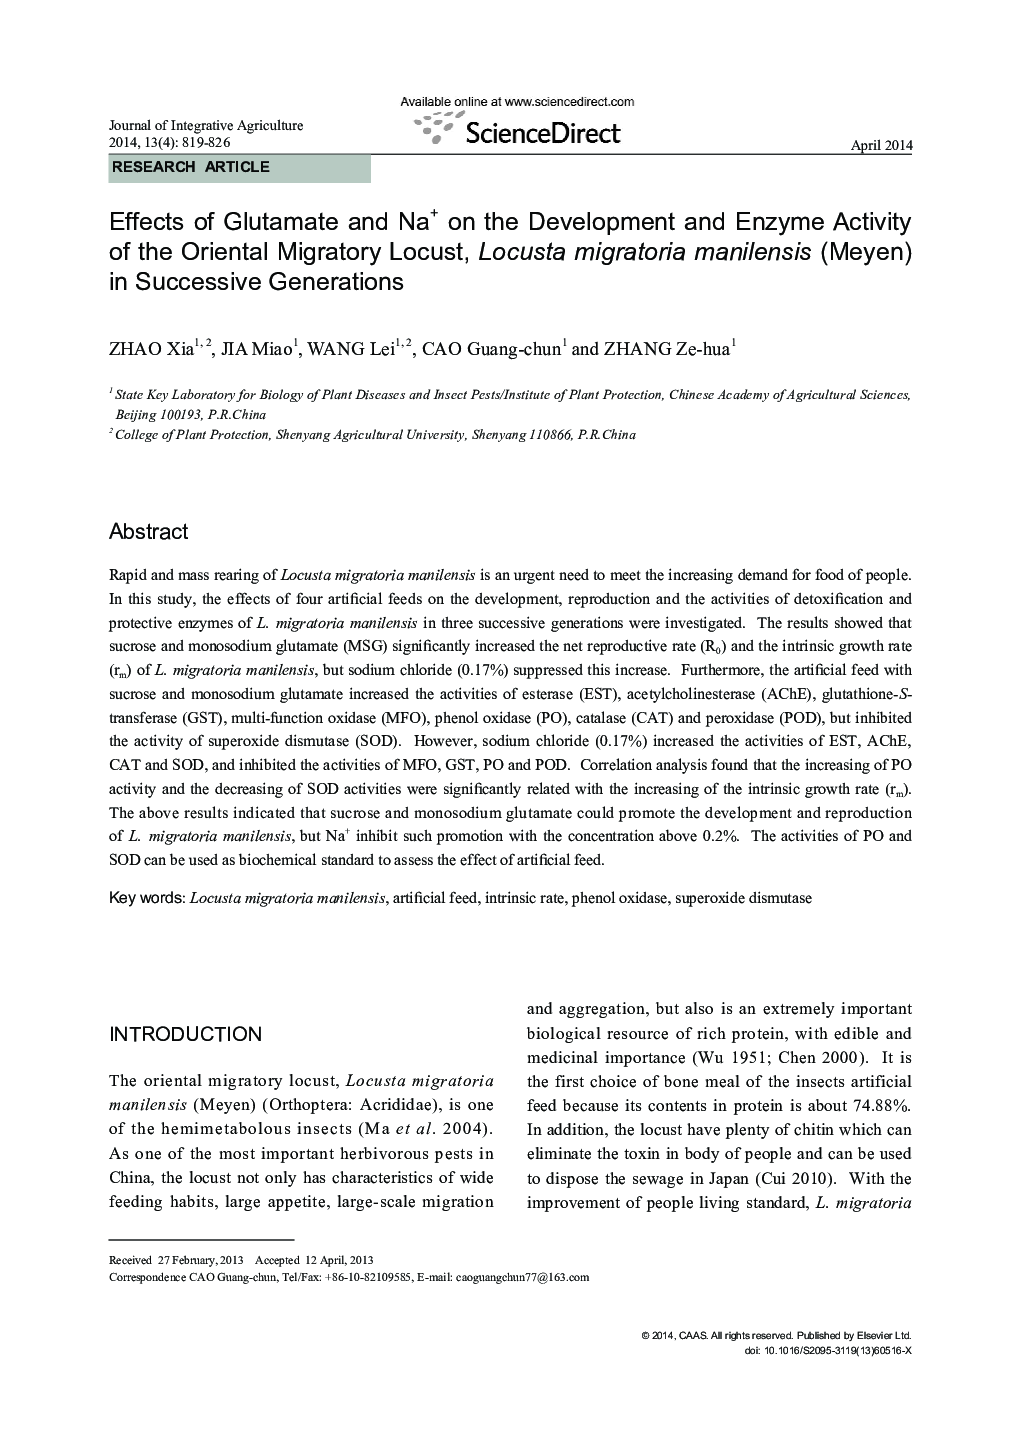 Effects of Glutamate and Na+ on the Development and Enzyme Activity of the Oriental Migratory Locust, Locusta migratoria manilensis (Meyen) in Successive Generations